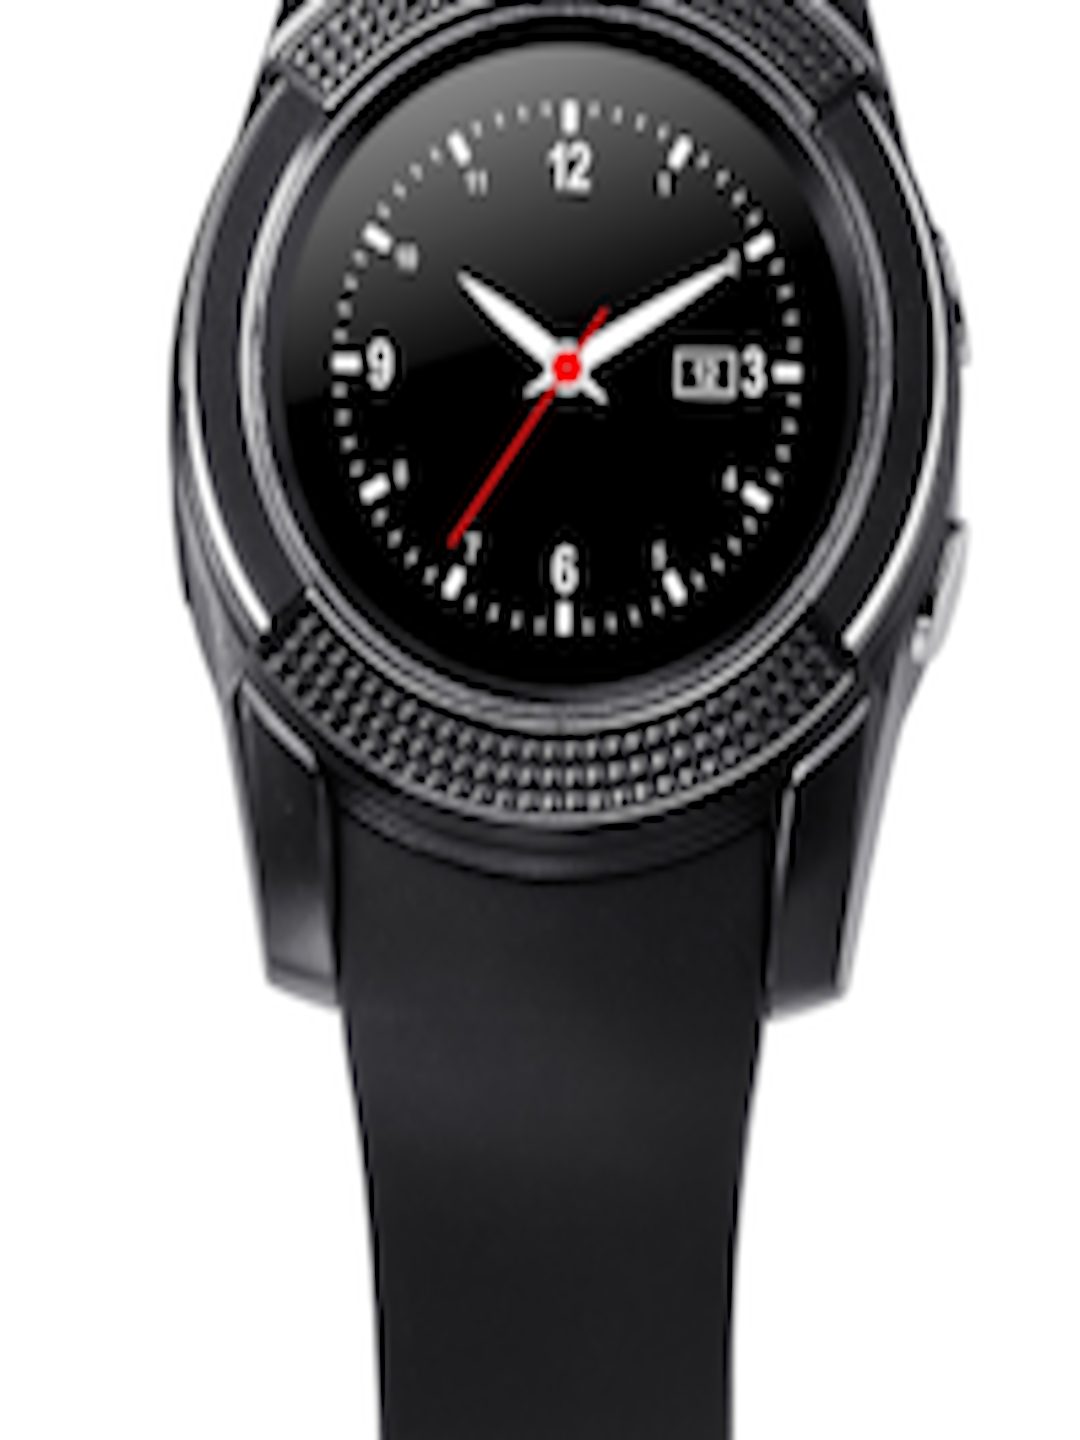 Buy NOISE Unisex Black Smartwatch - Smart Watches for ...